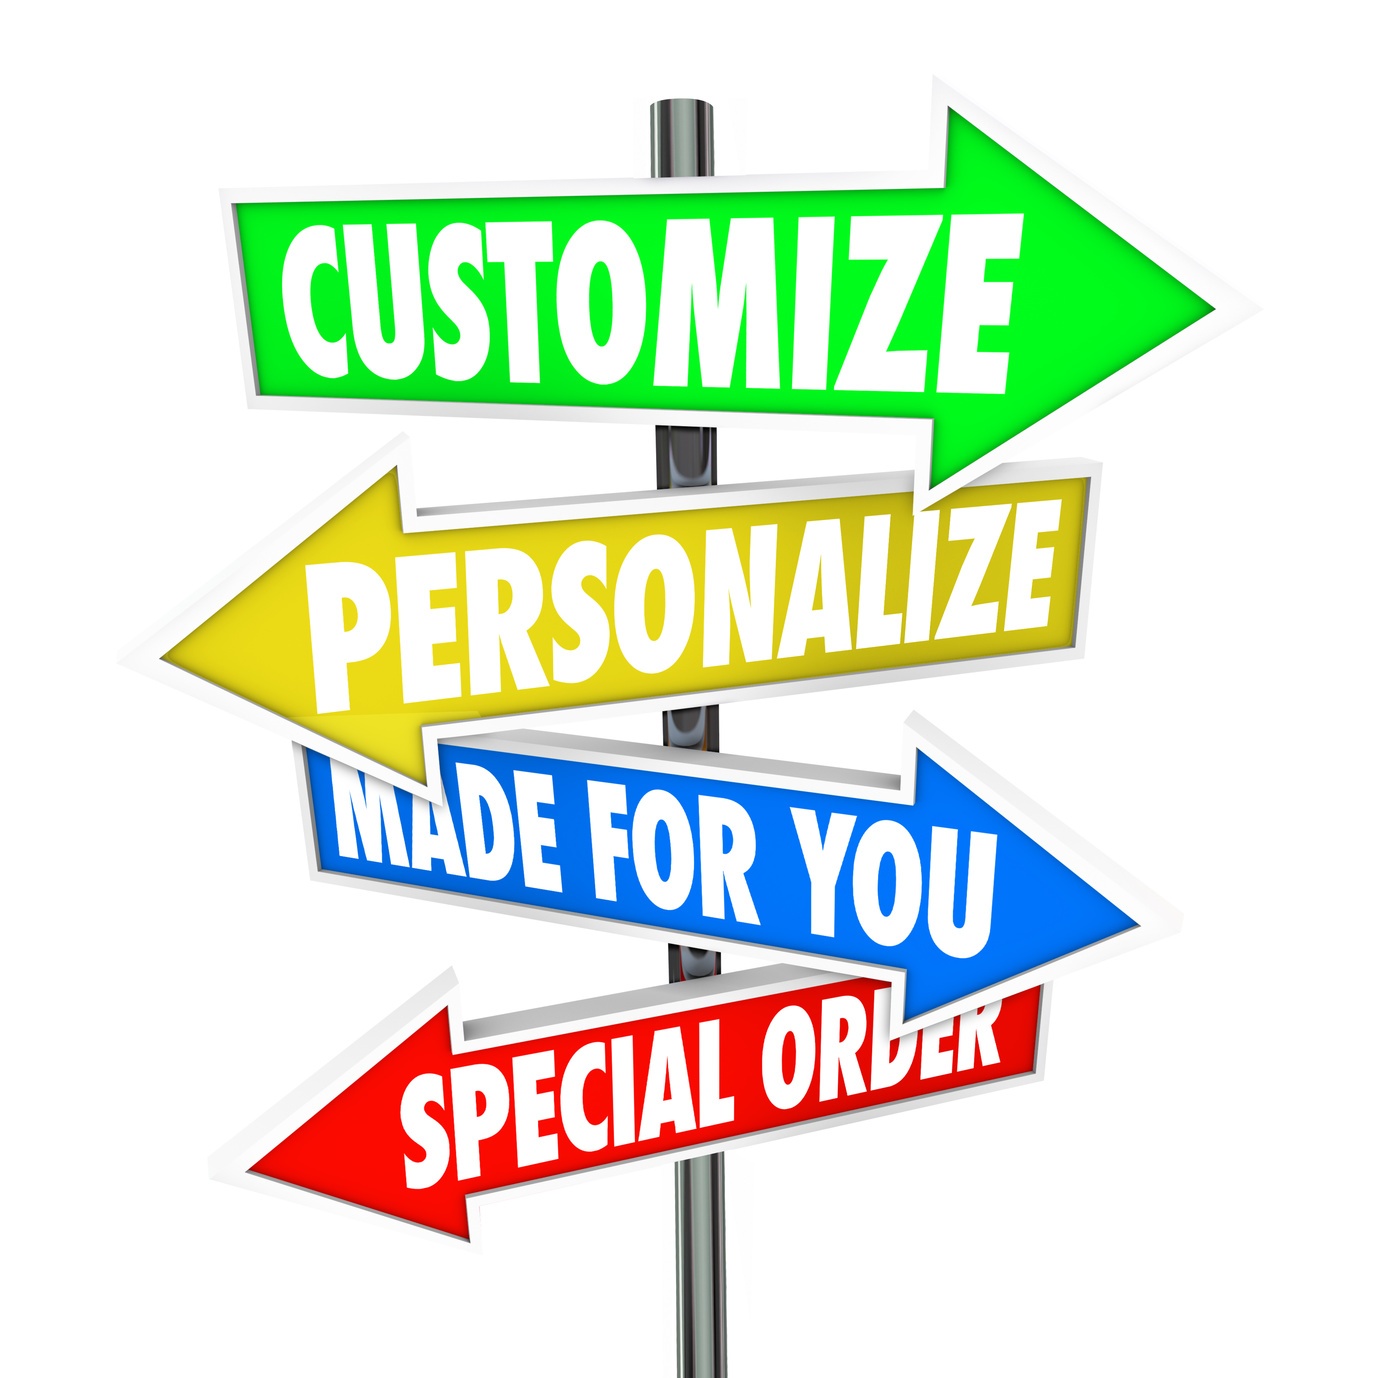 3 Ways to Define The Customer Sales Cycle and Segment Marketing Efforts